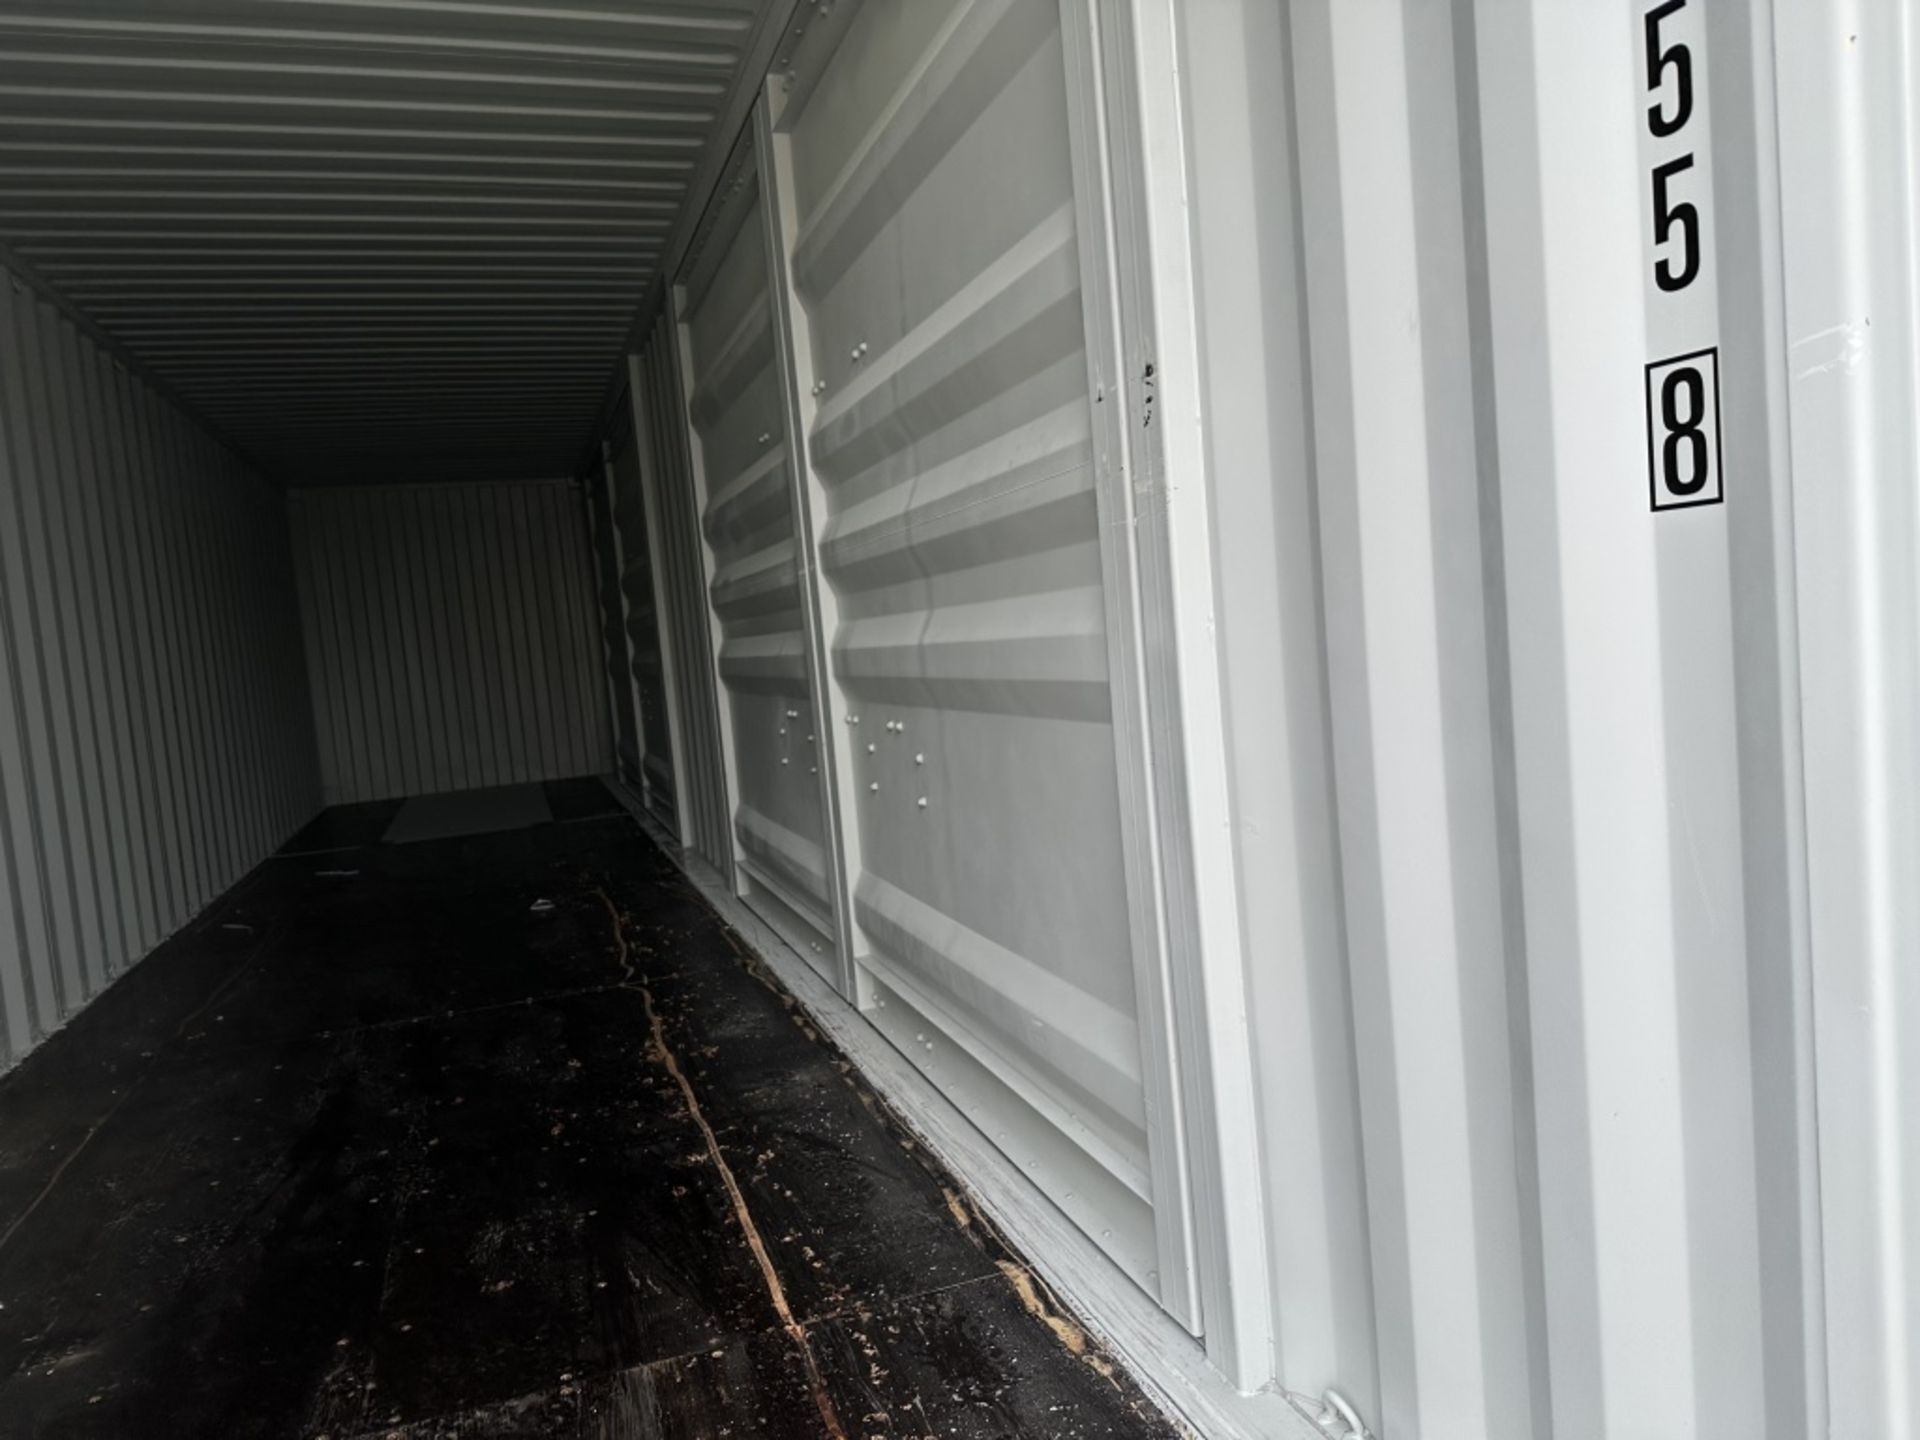 2022 40' High Cube Shipping Container - Image 8 of 8